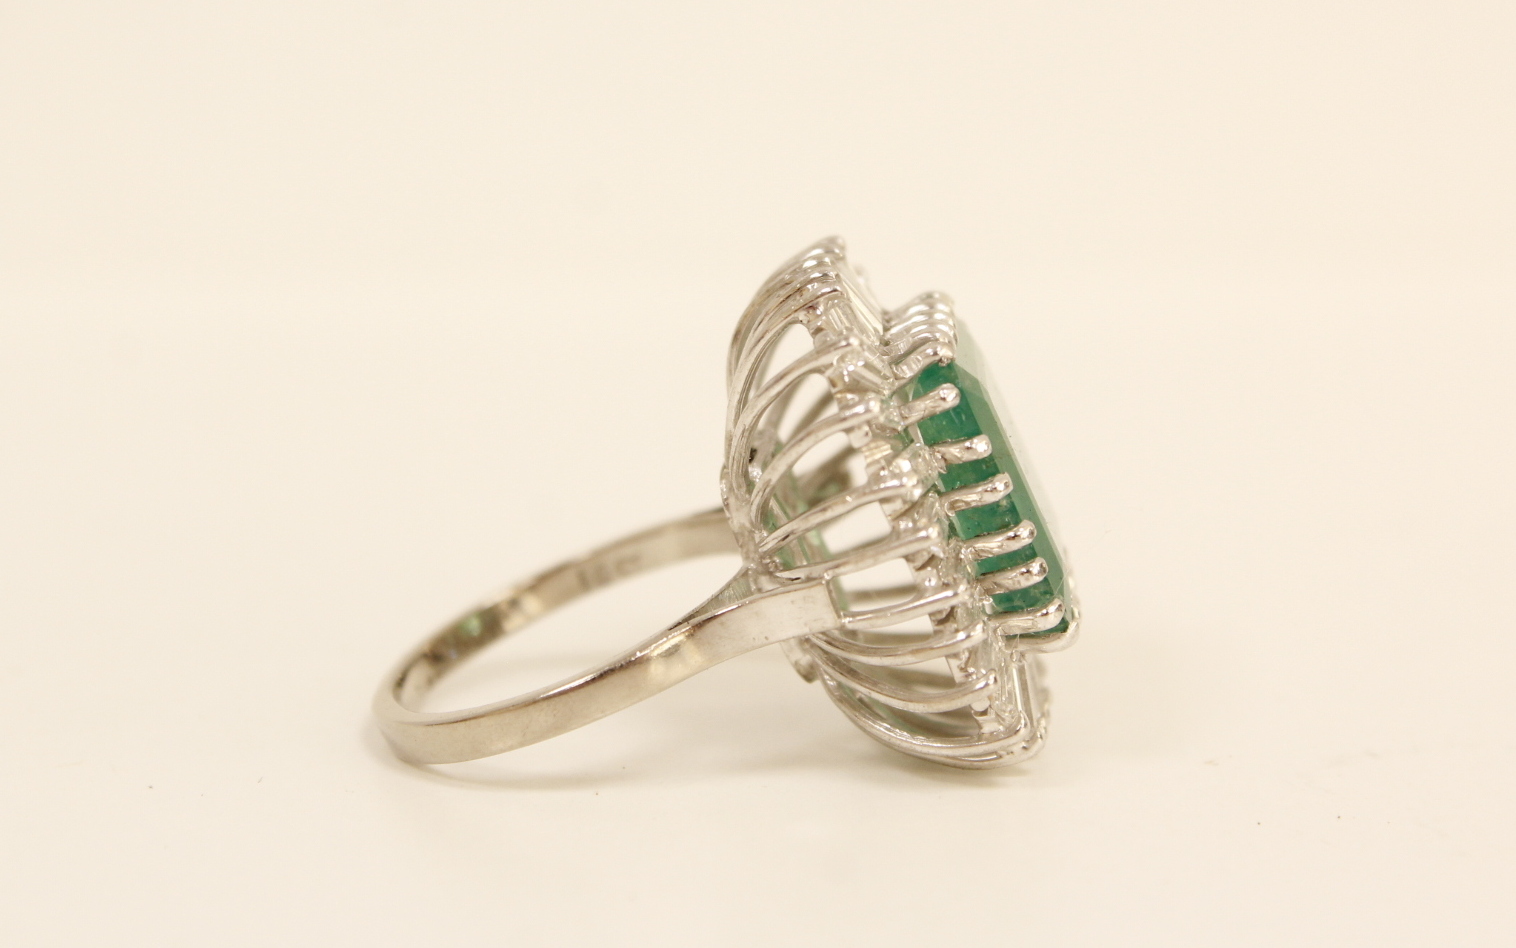 Impressive diamond and emerald cluster ring, the emerald given as approx. 3.5ct surrounded by - Image 2 of 5